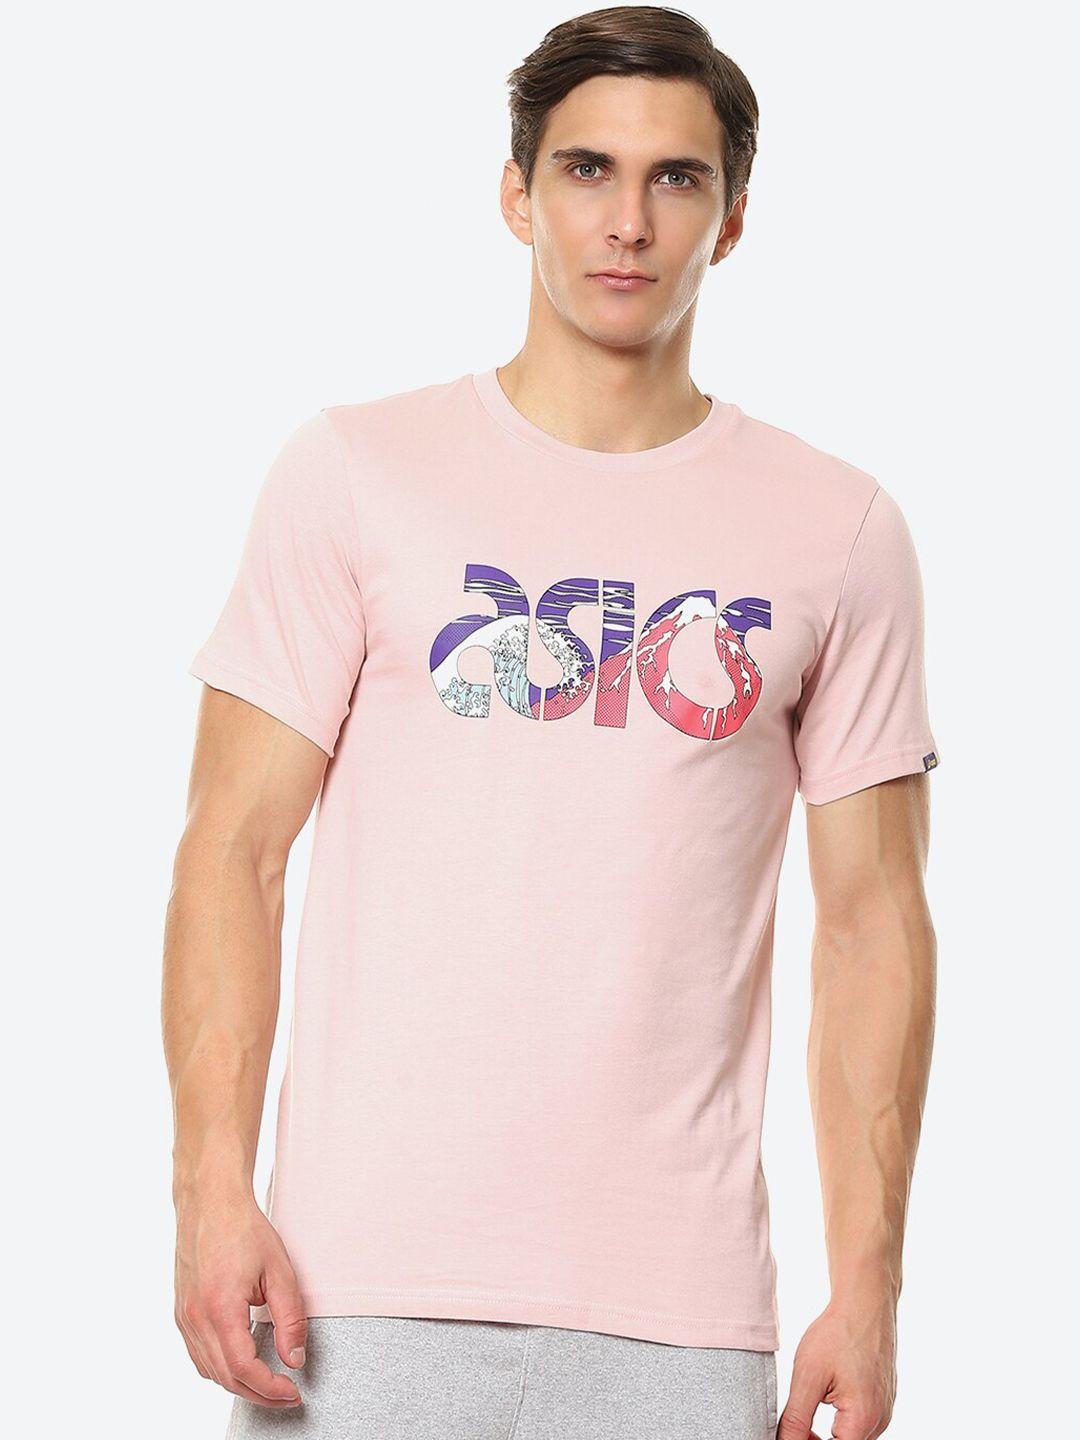 asics men peach-coloured typography printed cotton jpn view ss 1 training or gym t-shirt